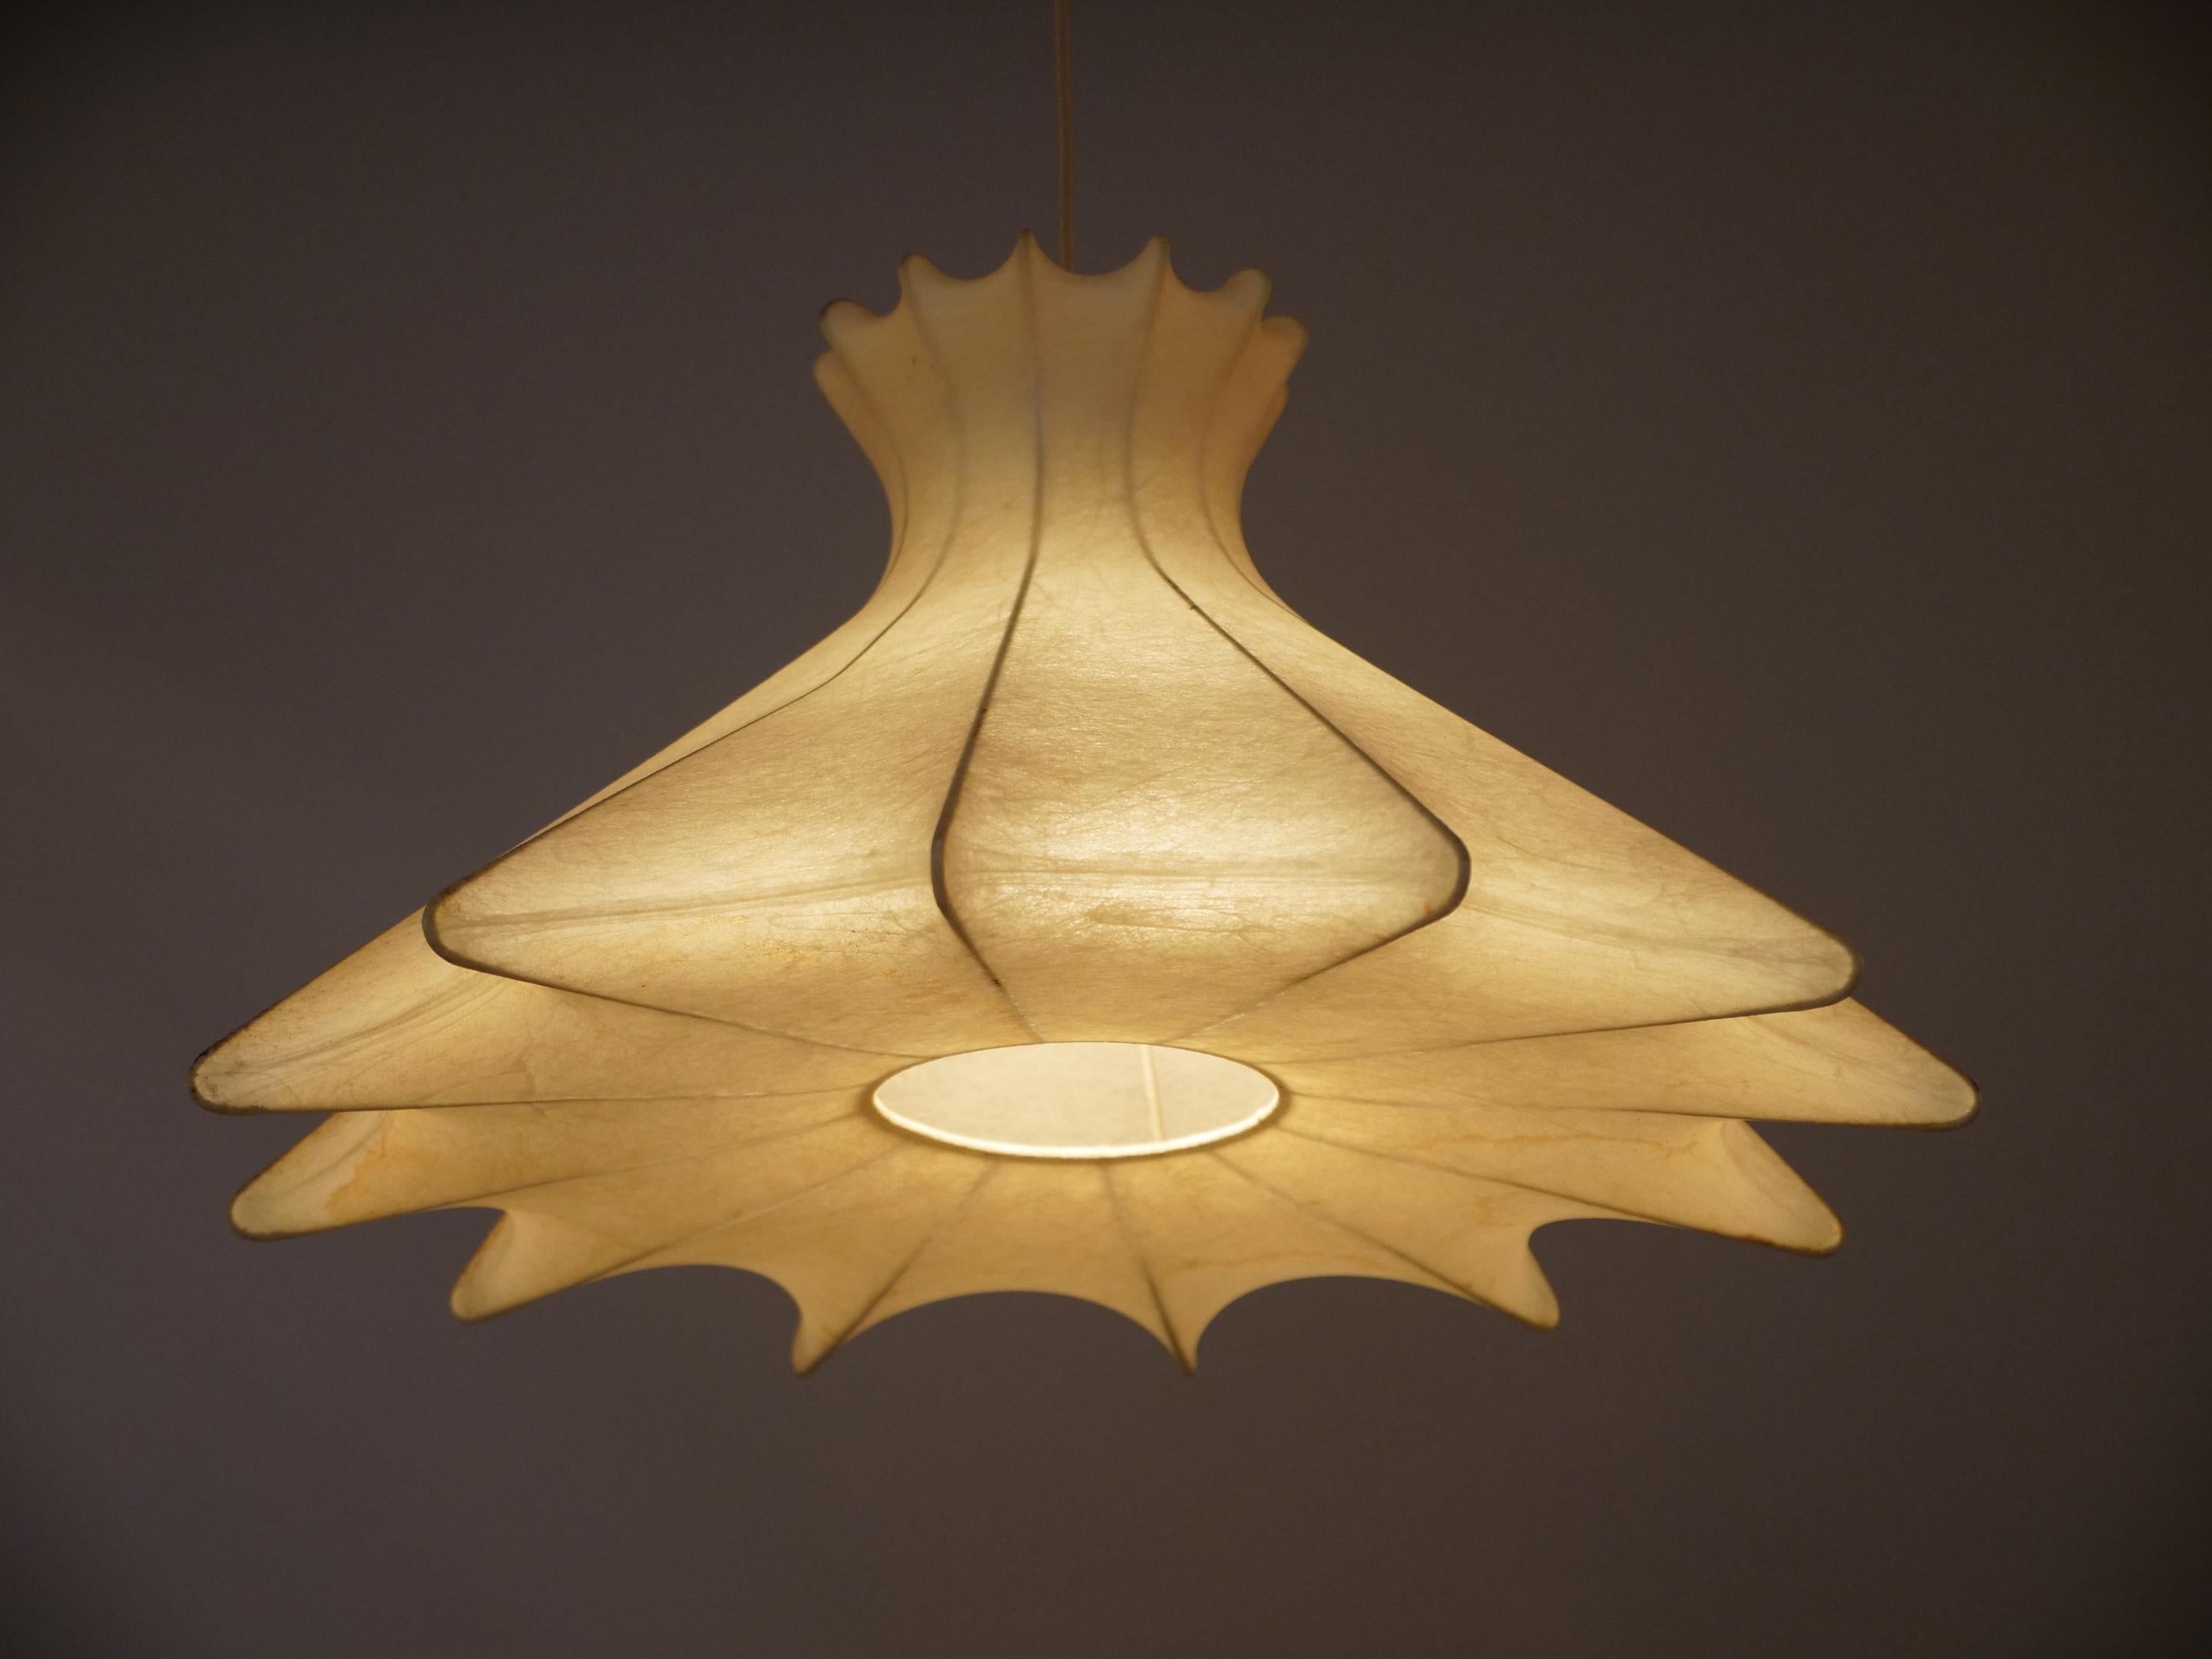 German 'Cocoon' Chandelier.  By Friedel Wauer for Goldkant Leuchten. “Goldkant”. Germany c1960 

One light fitting. E27. Re wired for Europe and USA

Size of the chandelier without drop 
Diameter 63cm x H 34cm 

